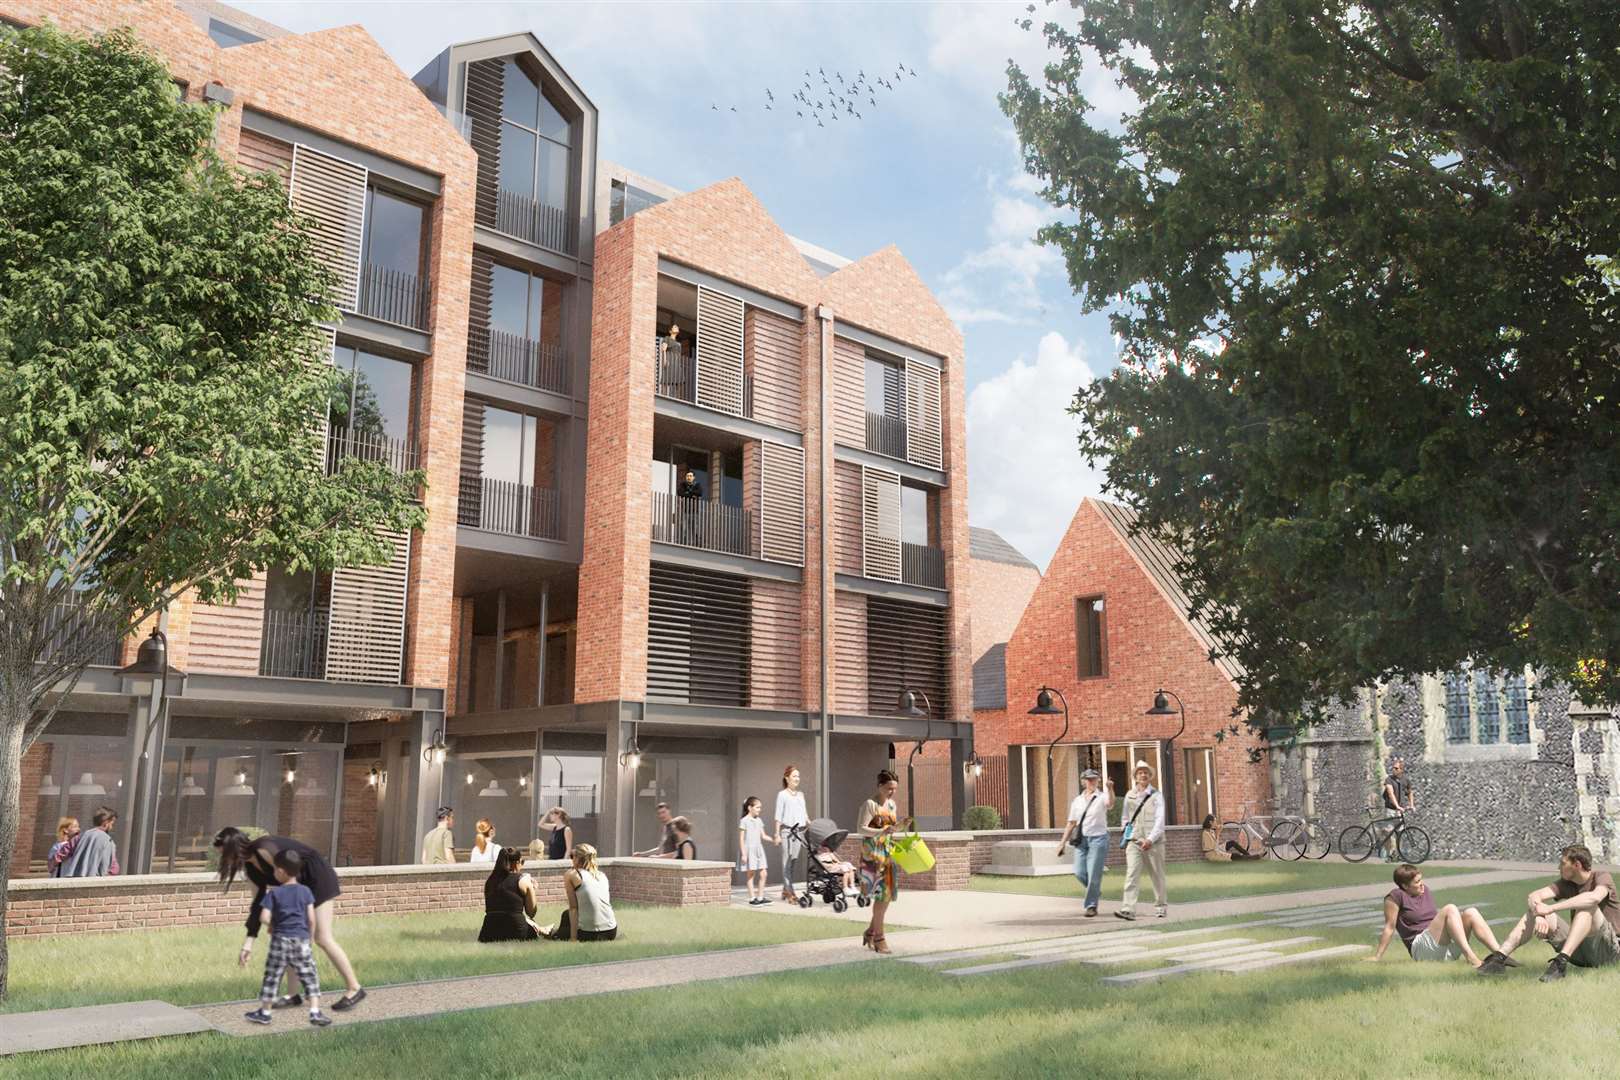 The vision for the rear of the former Nasons site in Canterbury